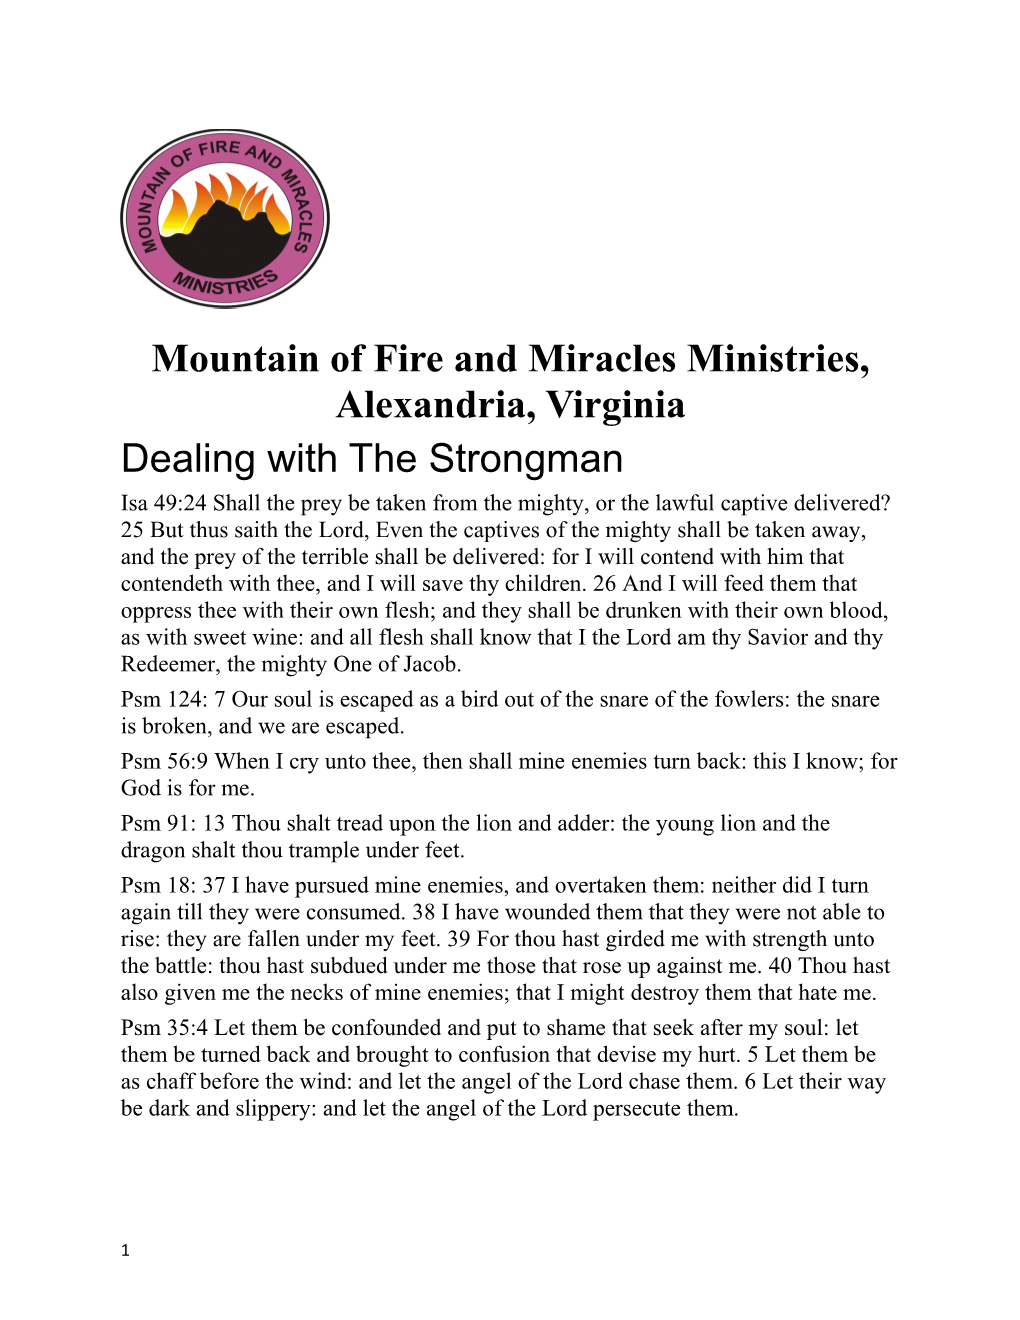 Mountain of Fire and Miracles Ministries, Alexandria, Virginia